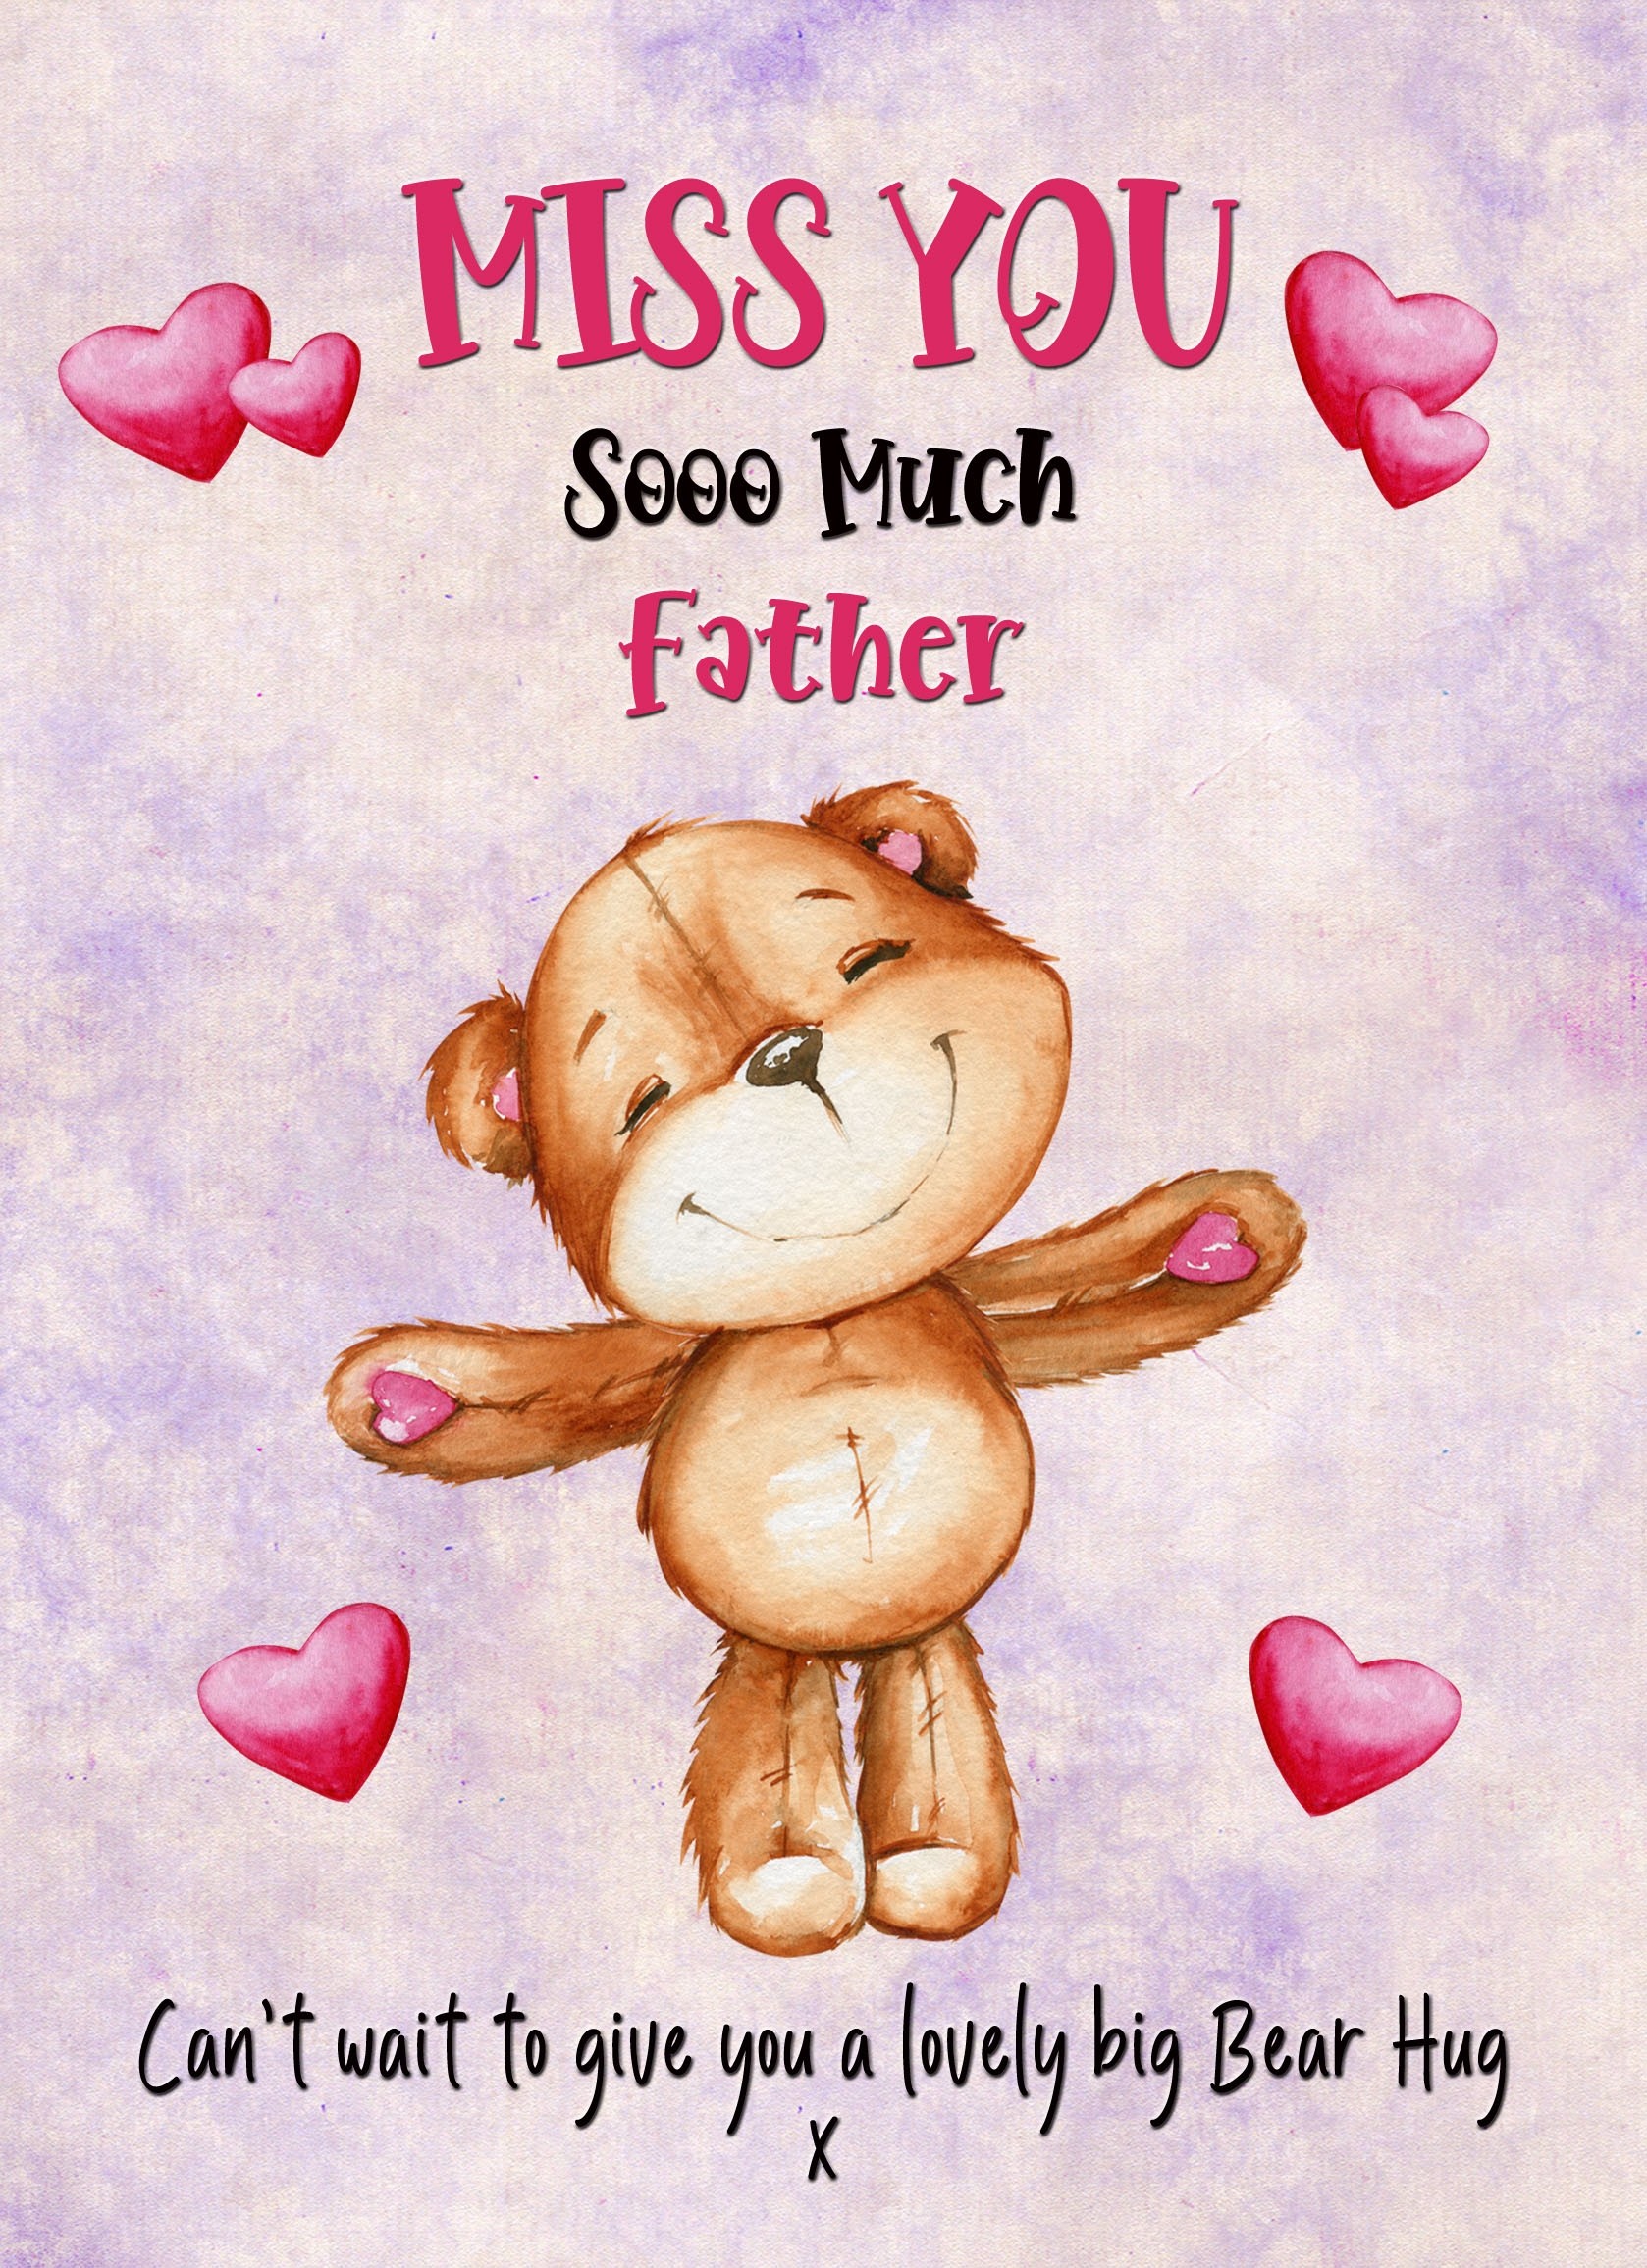 Missing You Card For Father (Hearts)